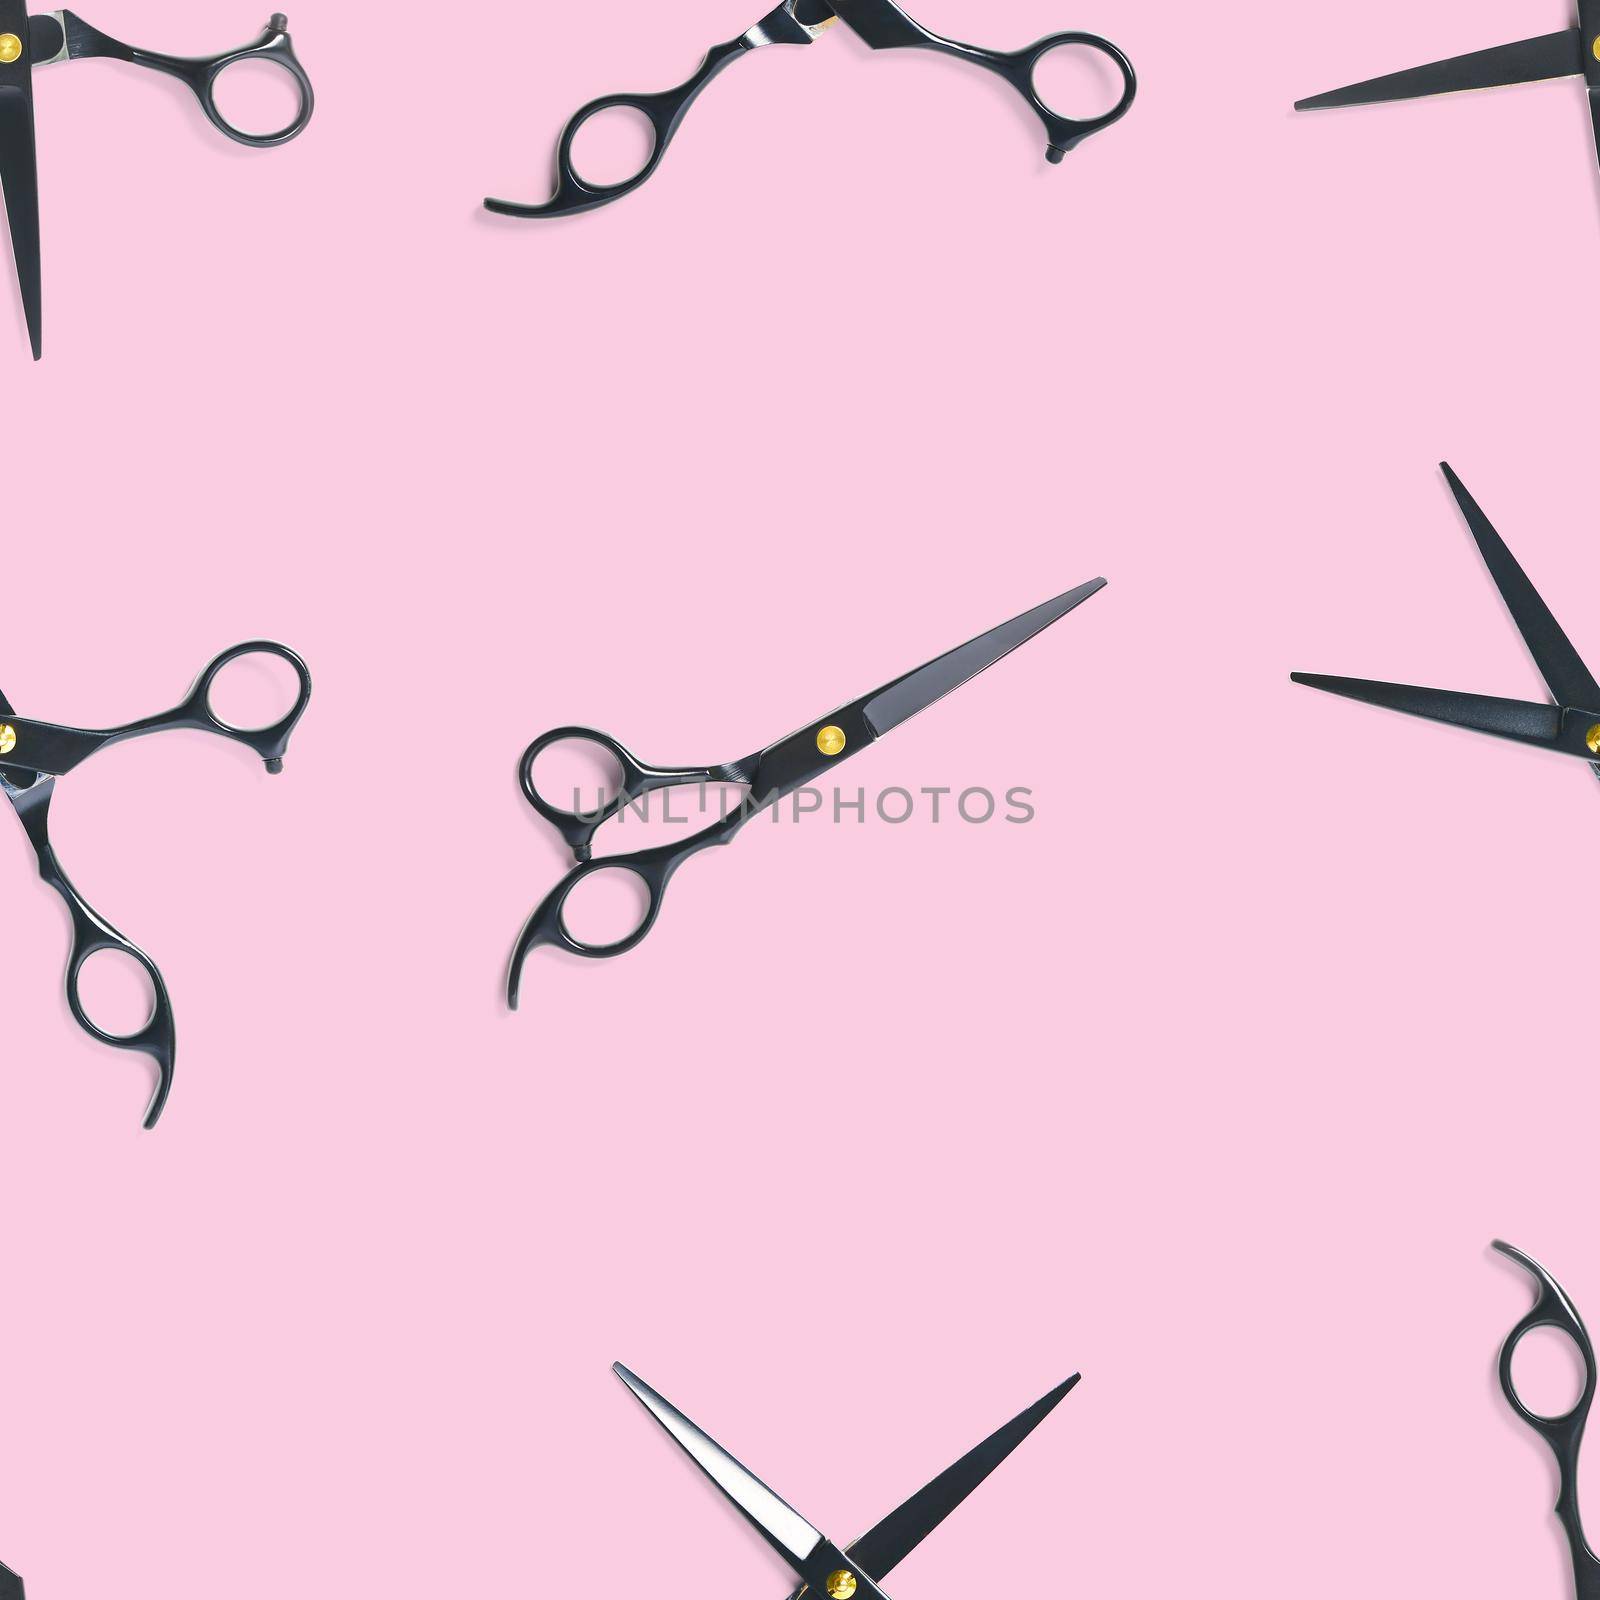 Seamless pattern of black scissors. professional hairdresser black scissors isolated on pink. Black barber scissors, close up. pop art background, for prints or posters